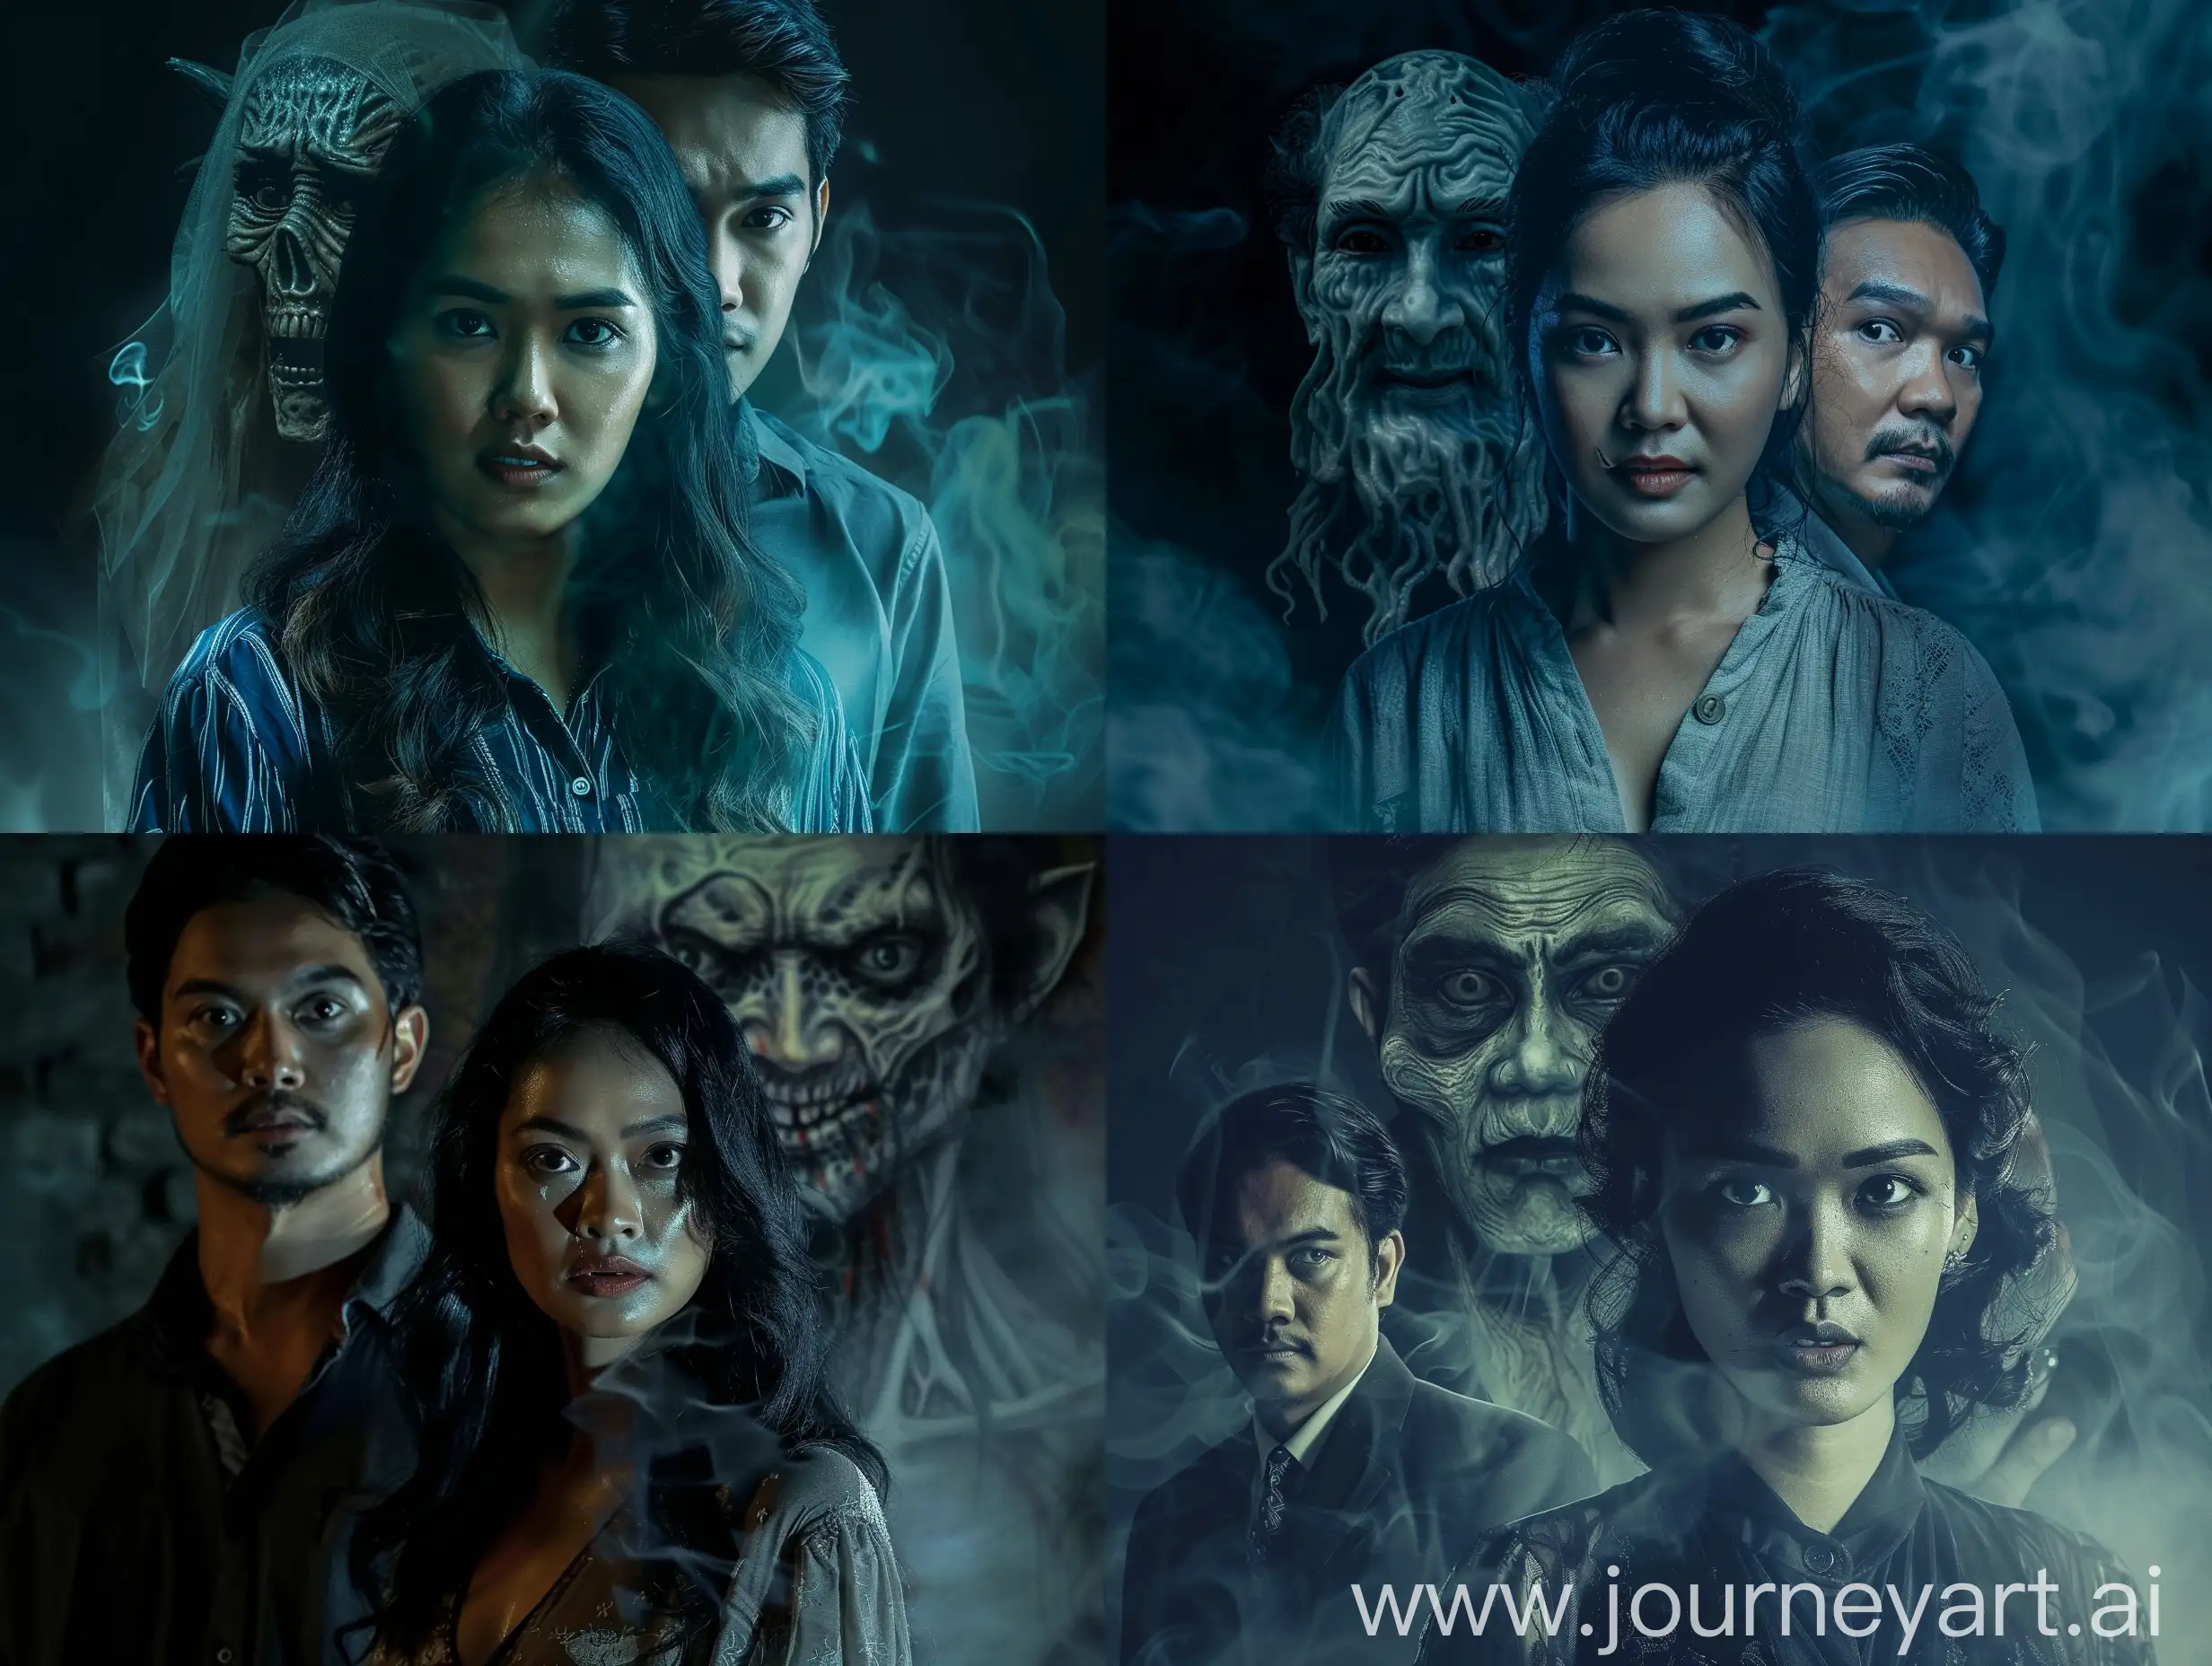 Indonesian-Woman-Confronts-Demon-Ghost-with-Handsome-Man-Horror-Movie-Poster